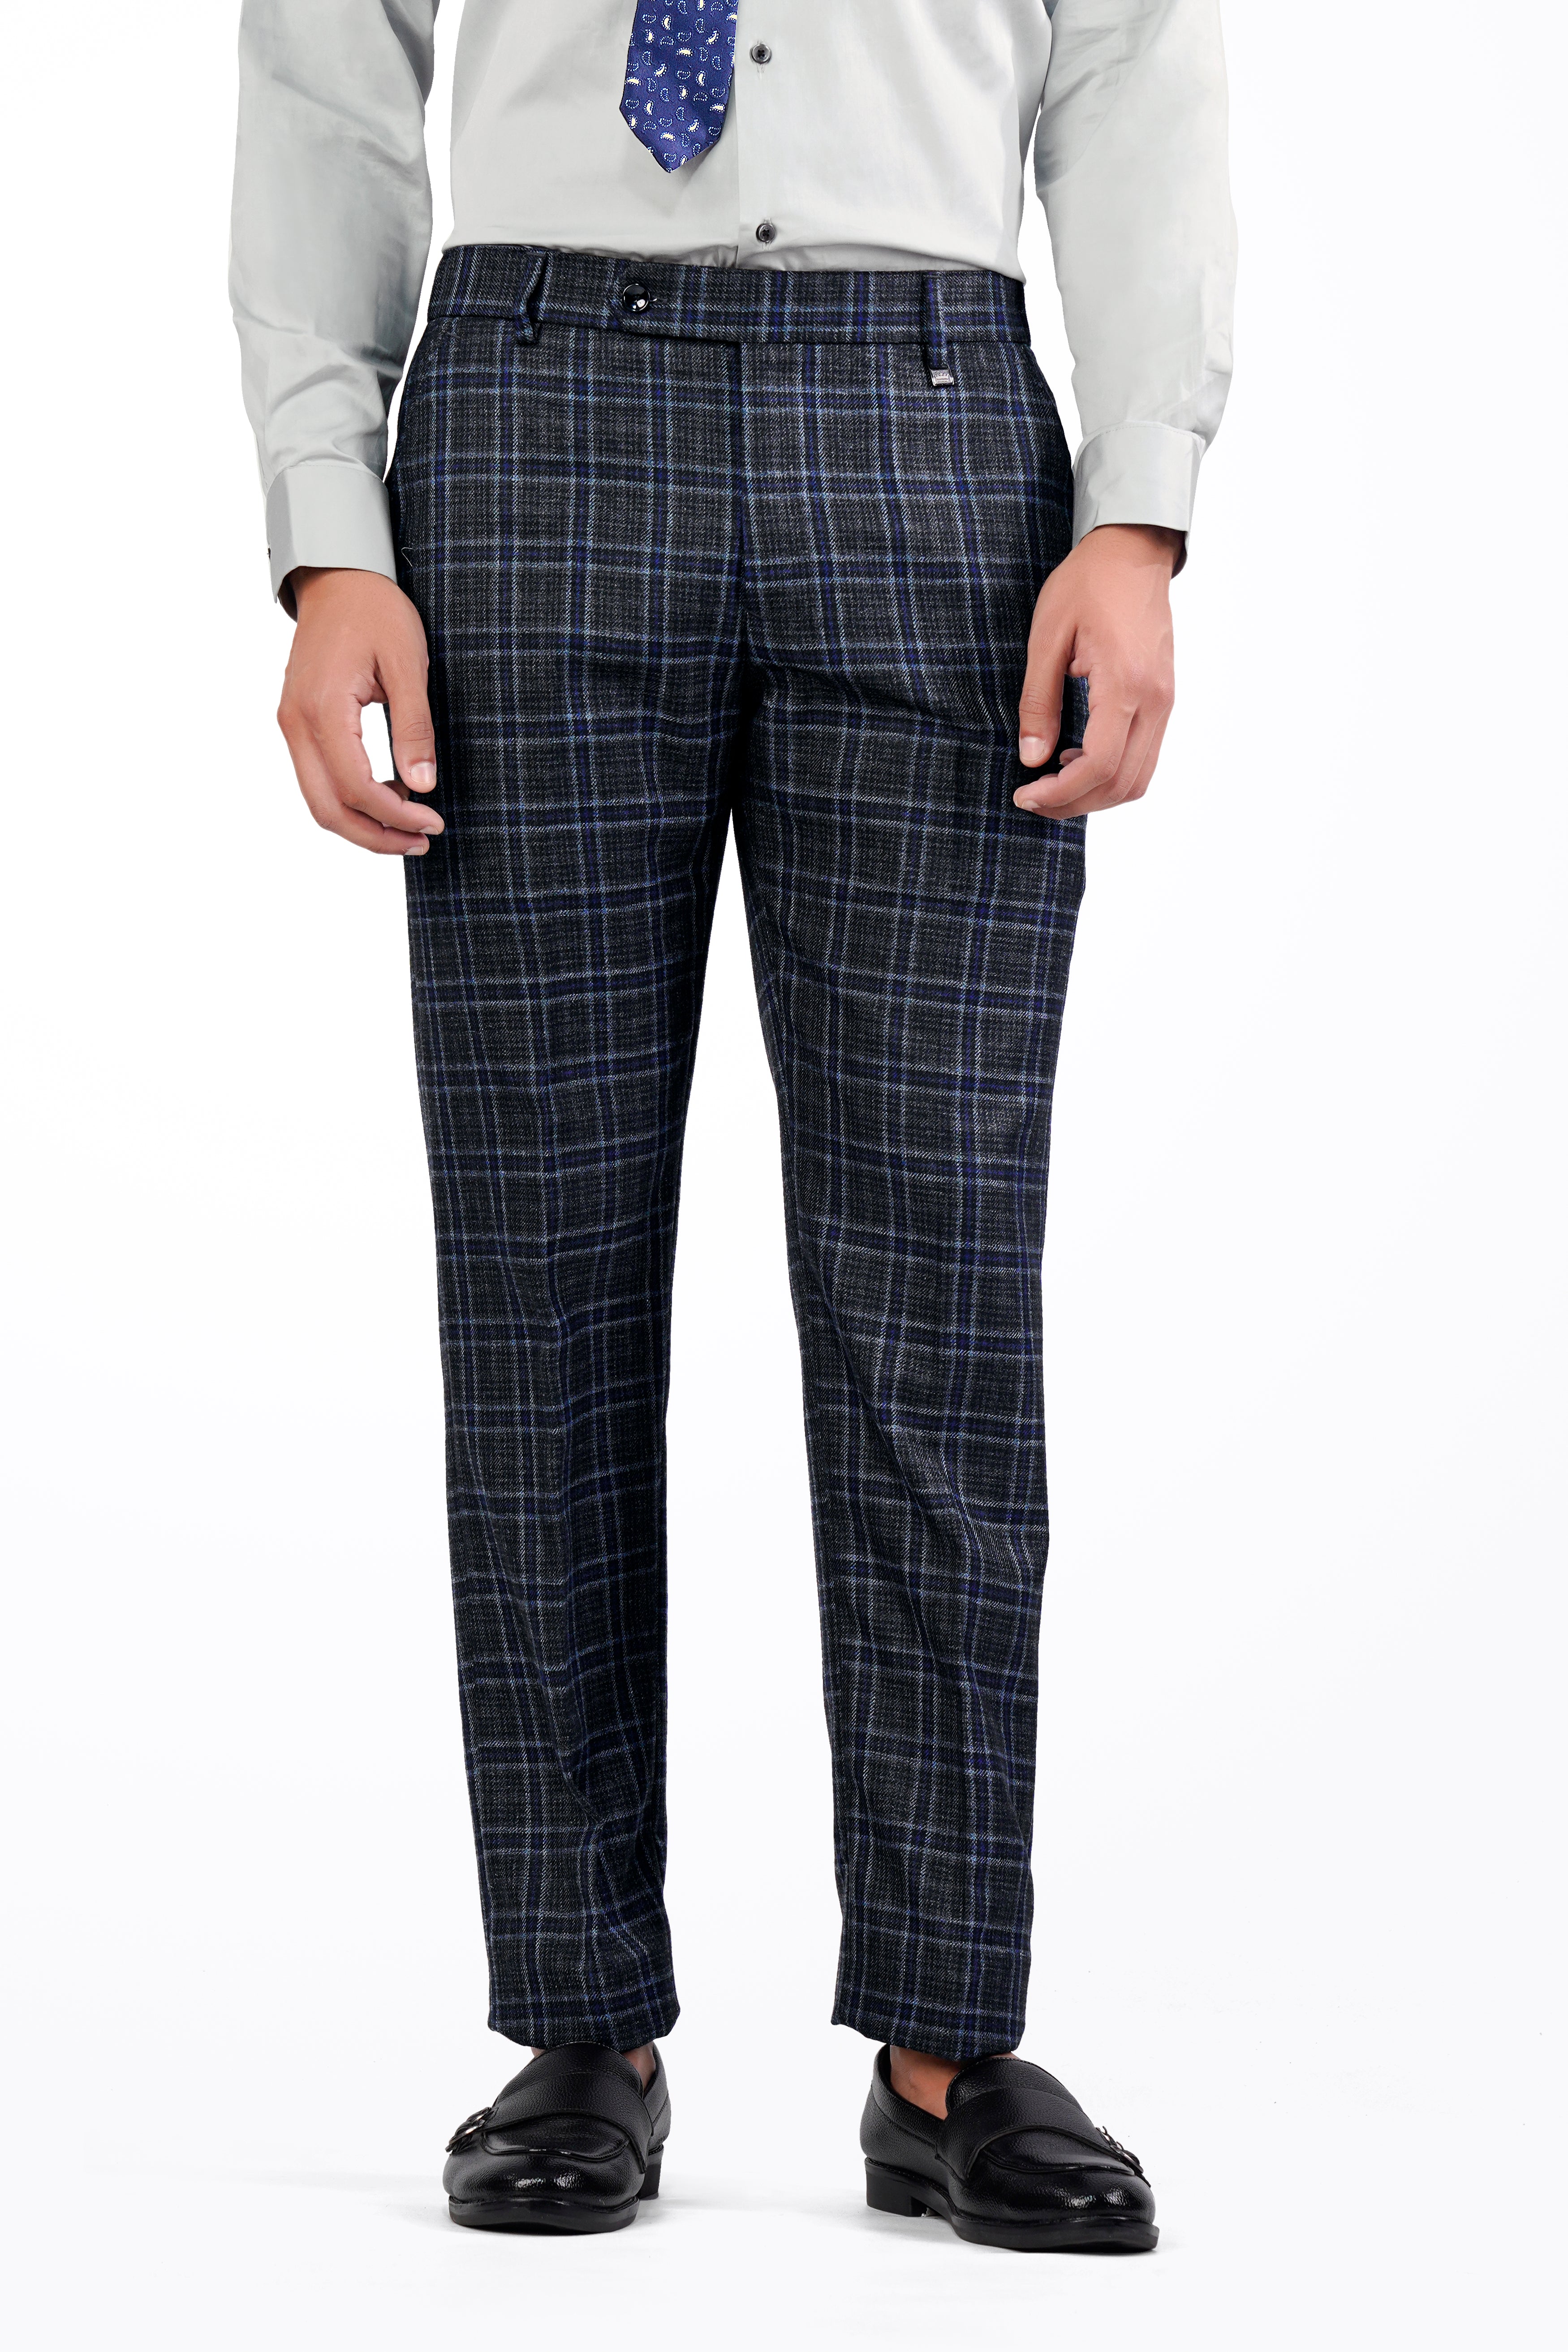 Bleached Black and Marine Blue Plaid Double Breasted Tweed Suit ST2907-DB-36,ST2907-DB-38,ST2907-DB-40,ST2907-DB-42,ST2907-DB-44,ST2907-DB-46,ST2907-DB-48,ST2907-DB-50,ST2907-DB-52,ST2907-DB-54,ST2907-DB-56,ST2907-DB-58,ST2907-DB-60